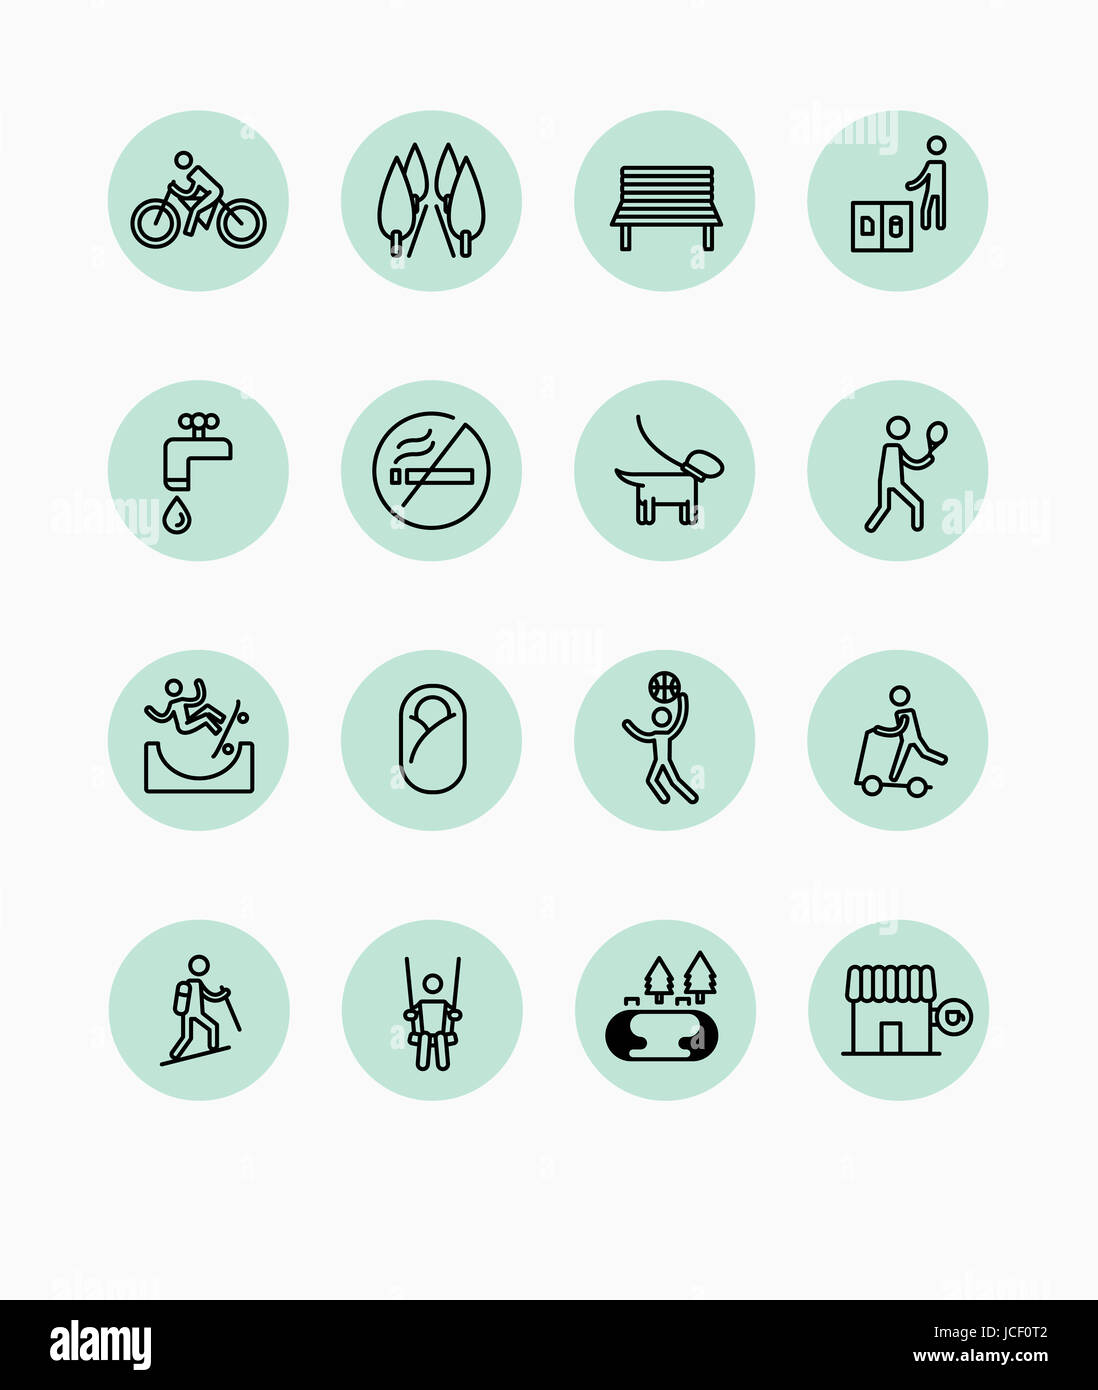 Set of pictogram icons related to park Stock Photo